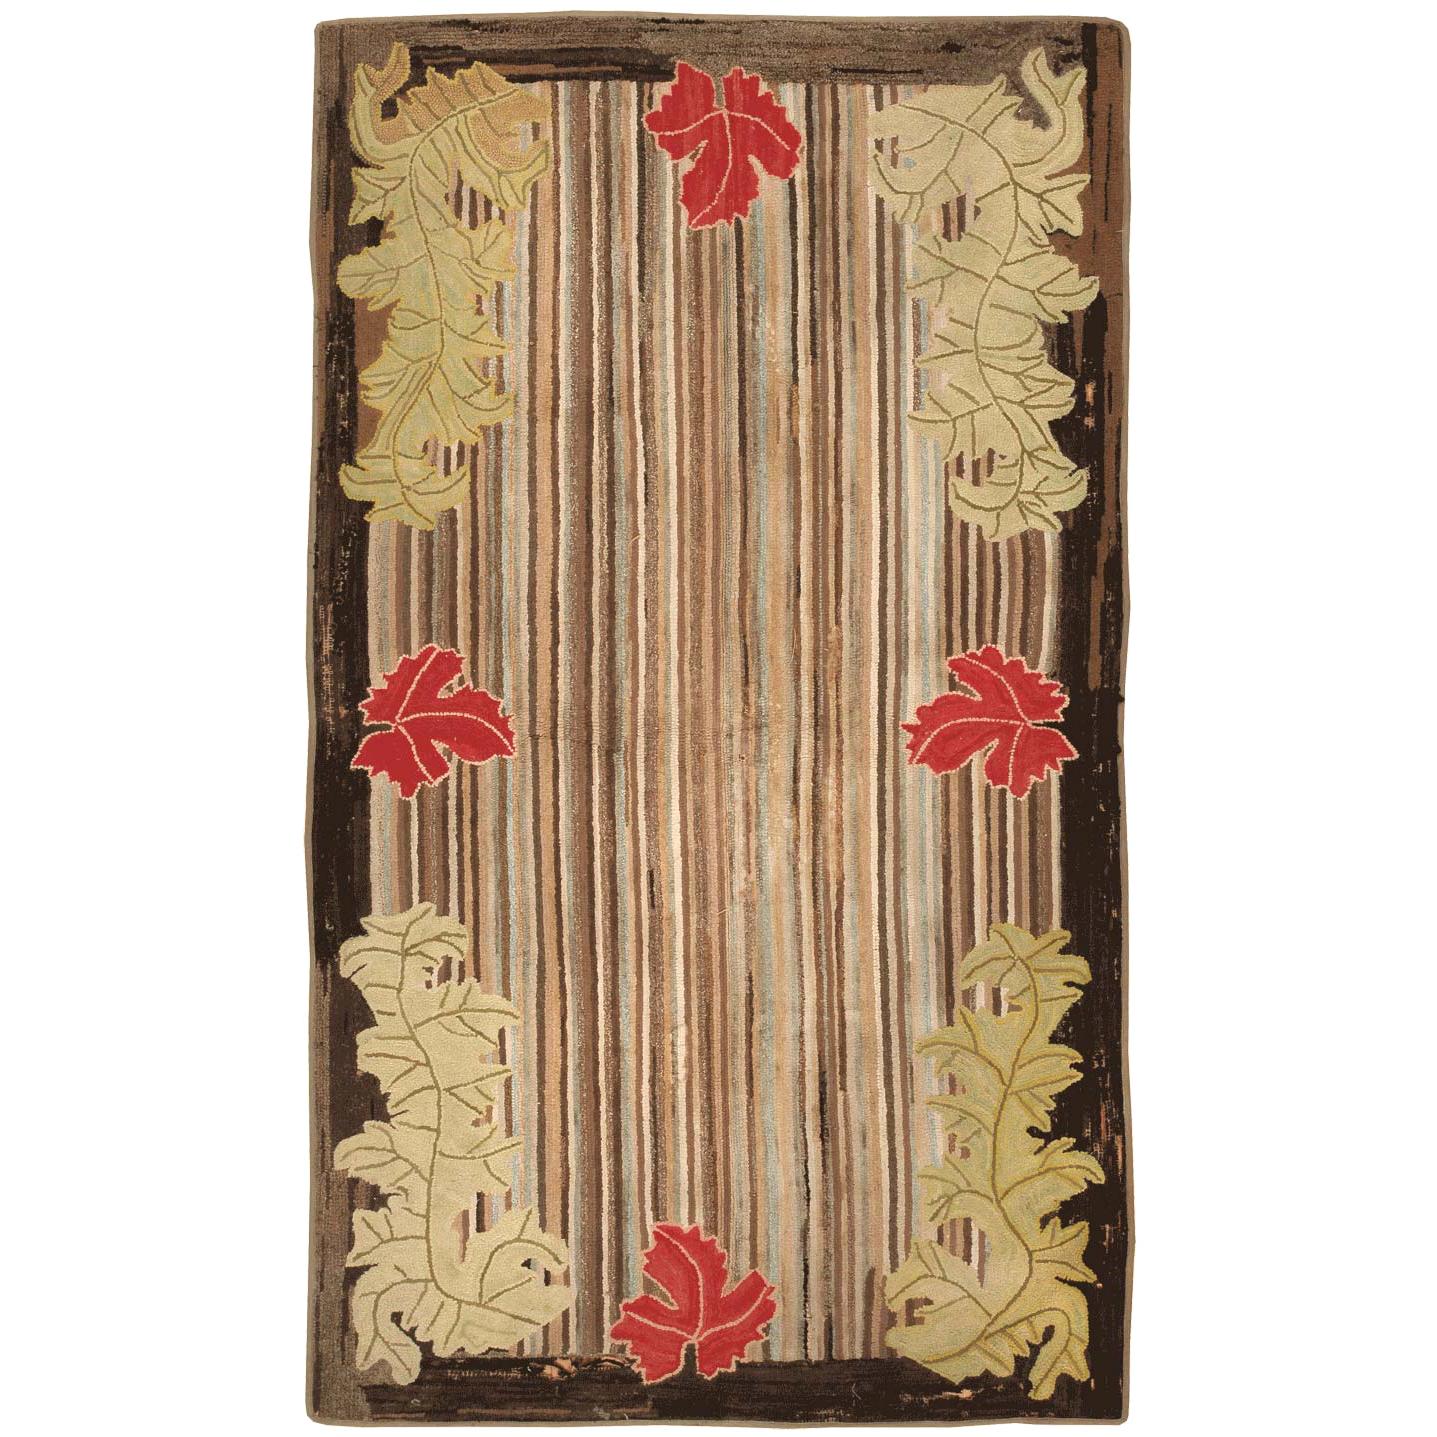 Nazmiyal Collection Antique Hooked American Rug. Size: 4 ft 5 in x 7 ft 9 in